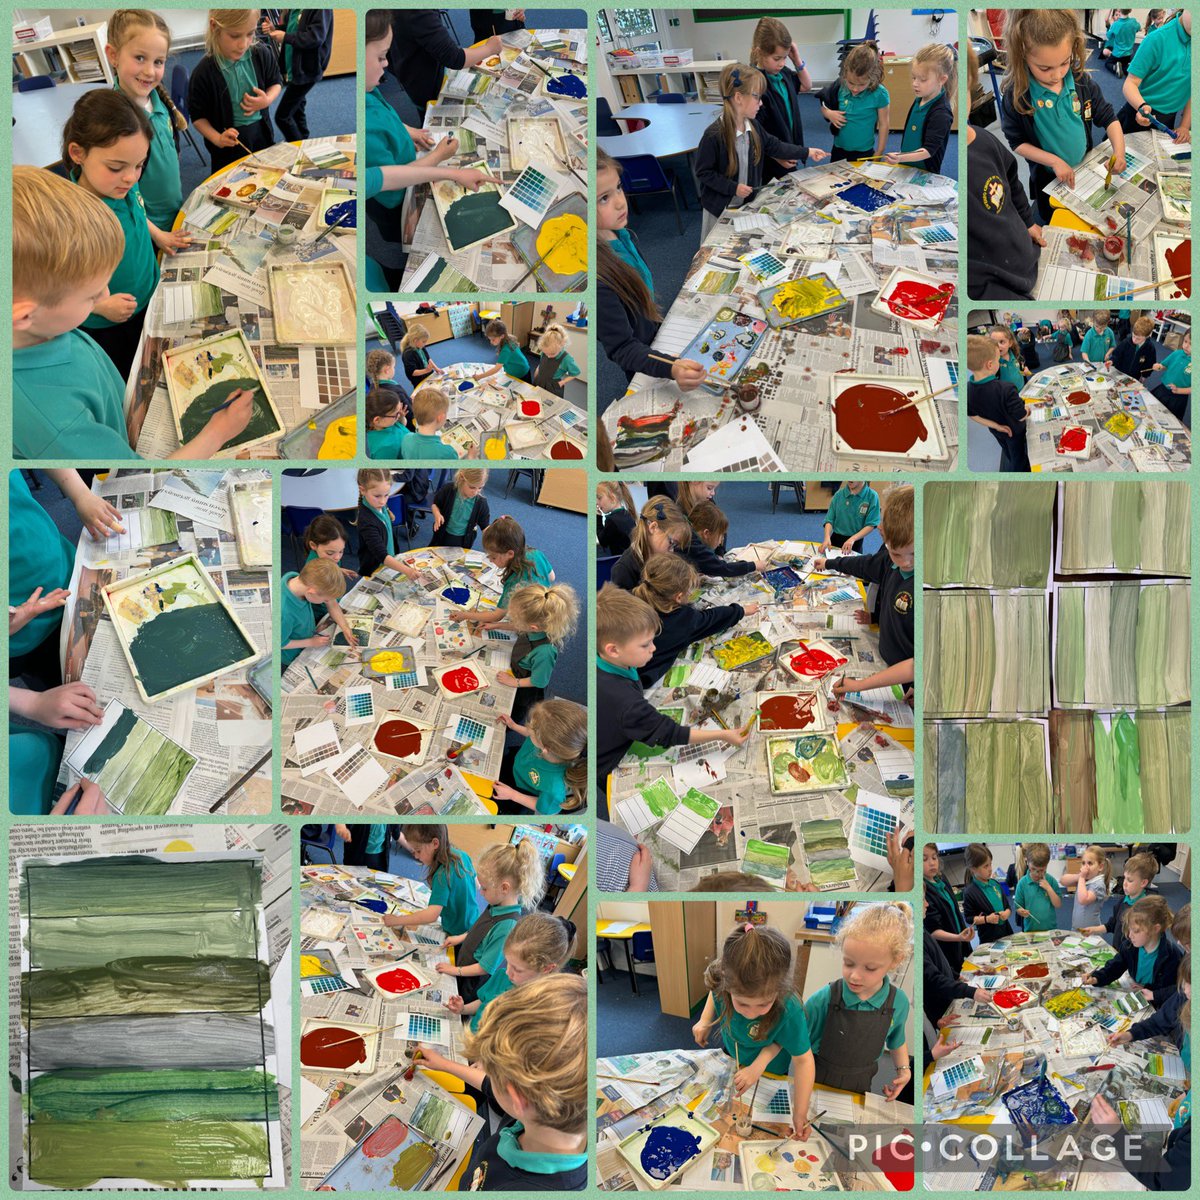 #GwenfoY1 experimenting with colour mixing and shade to make a selection of earthy tones ready to create their Woodland pictures next week 🌳 🪵 #GwenfoExpressiveArts #GwenfoHumanaties